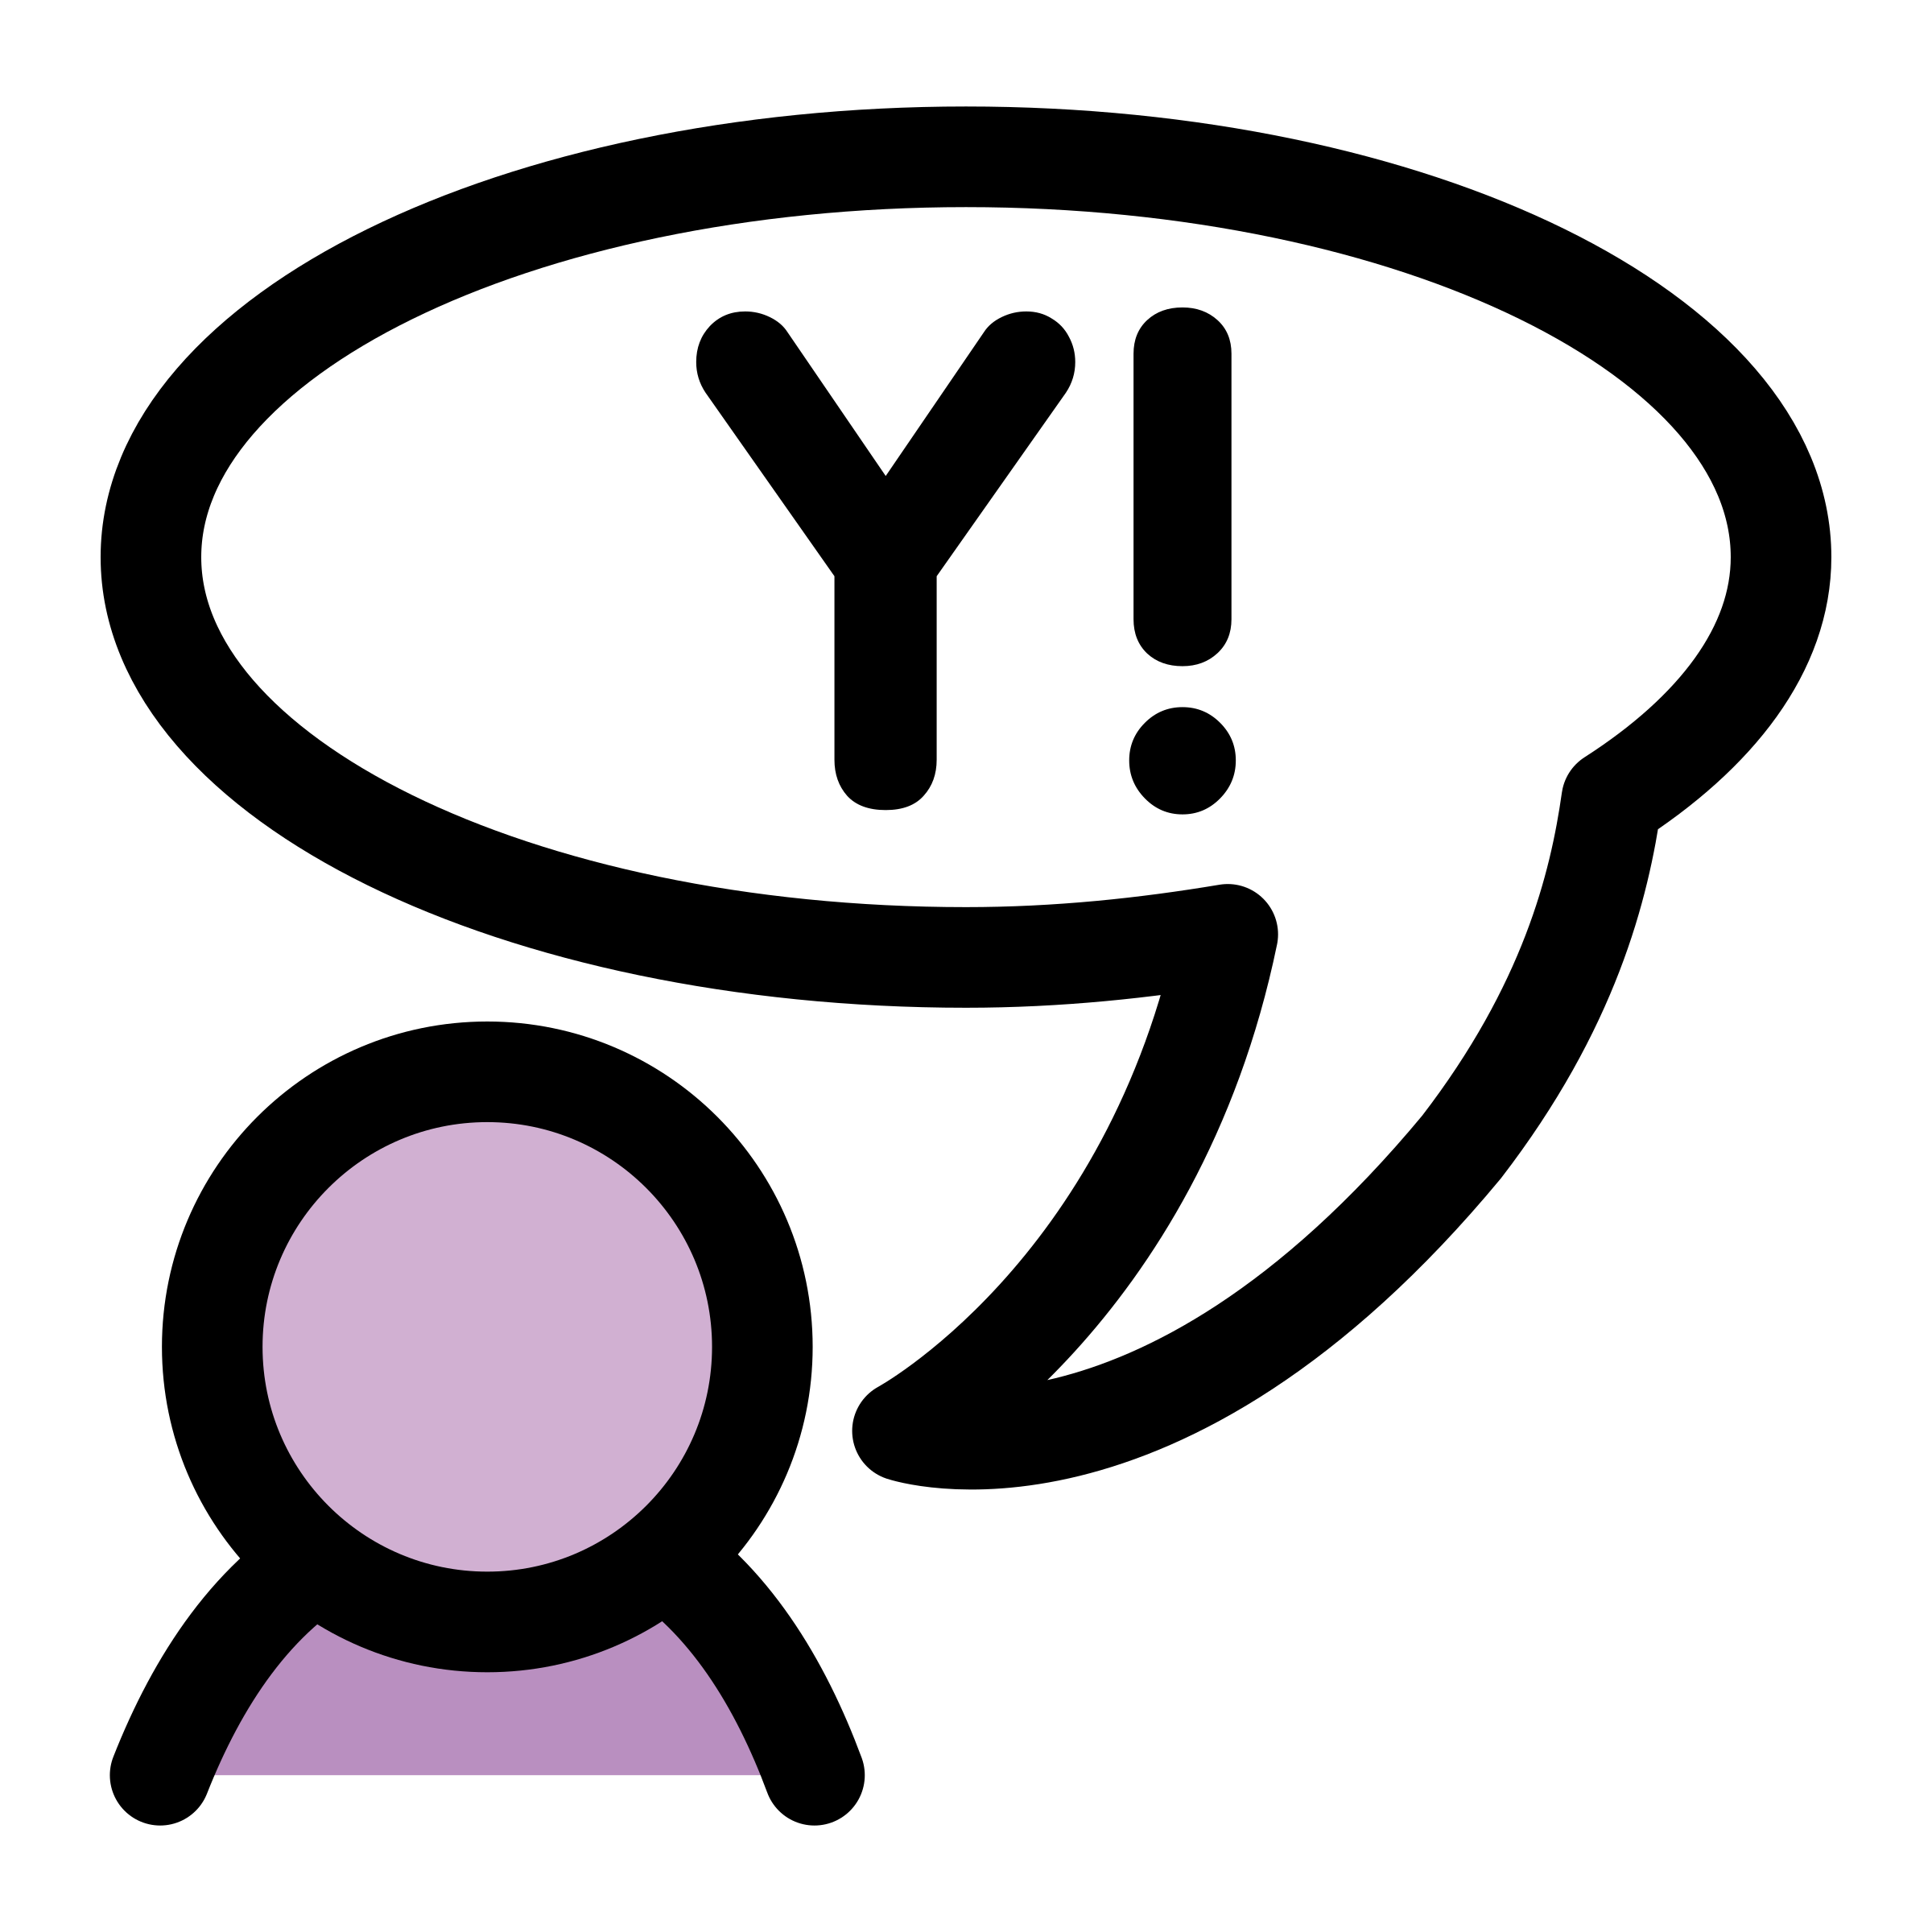 yahoo free clipart images - photo #10